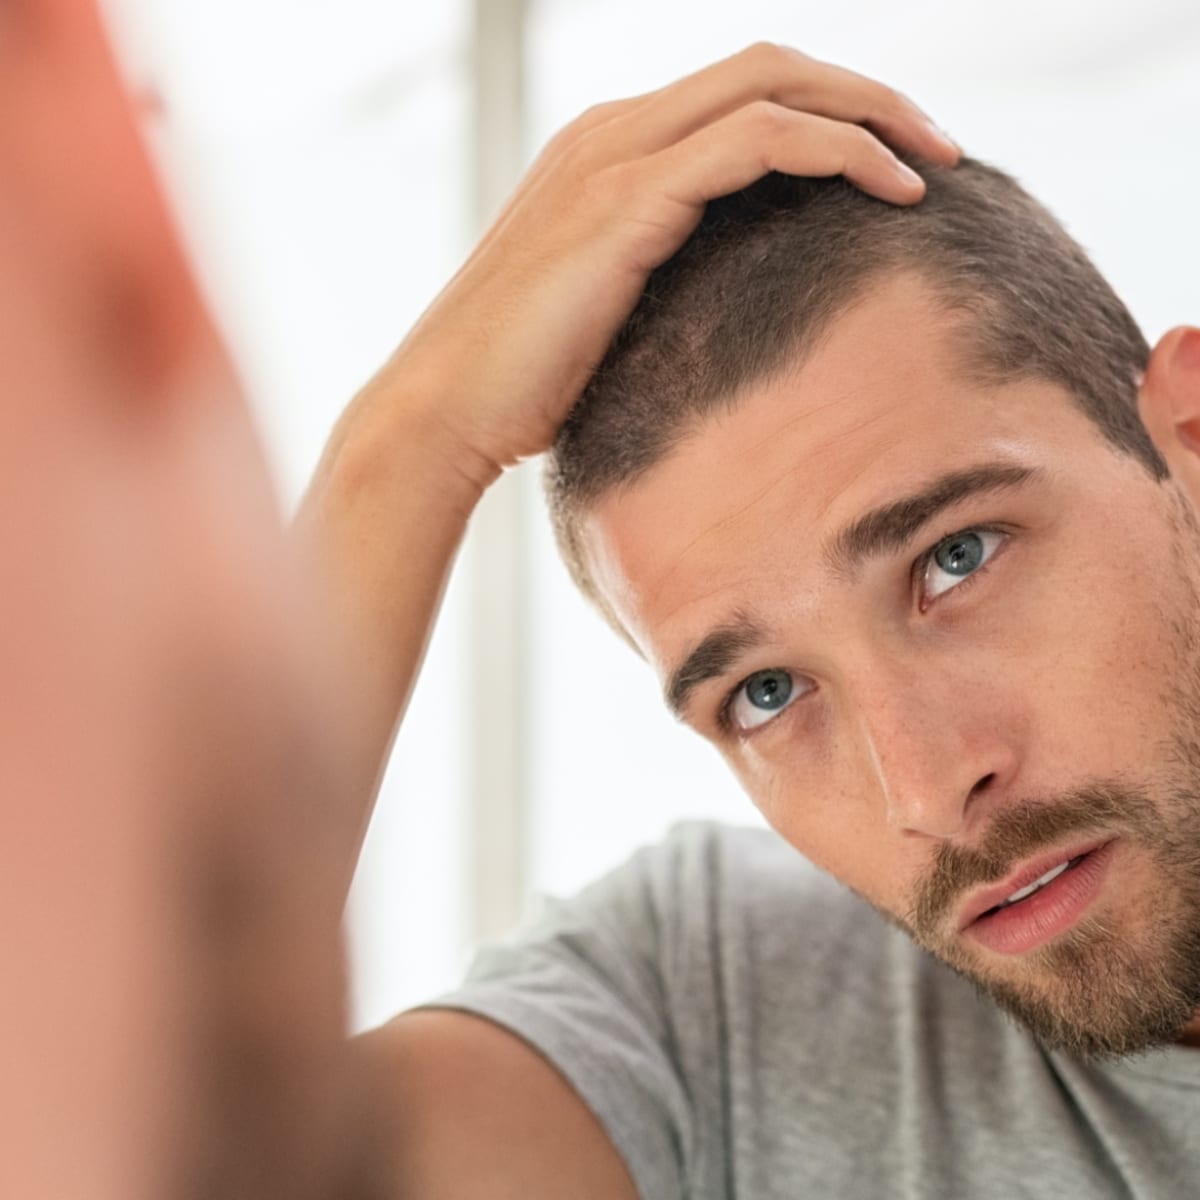 How to Cut Mens Hair at Home During the Coronavirus Outbreak